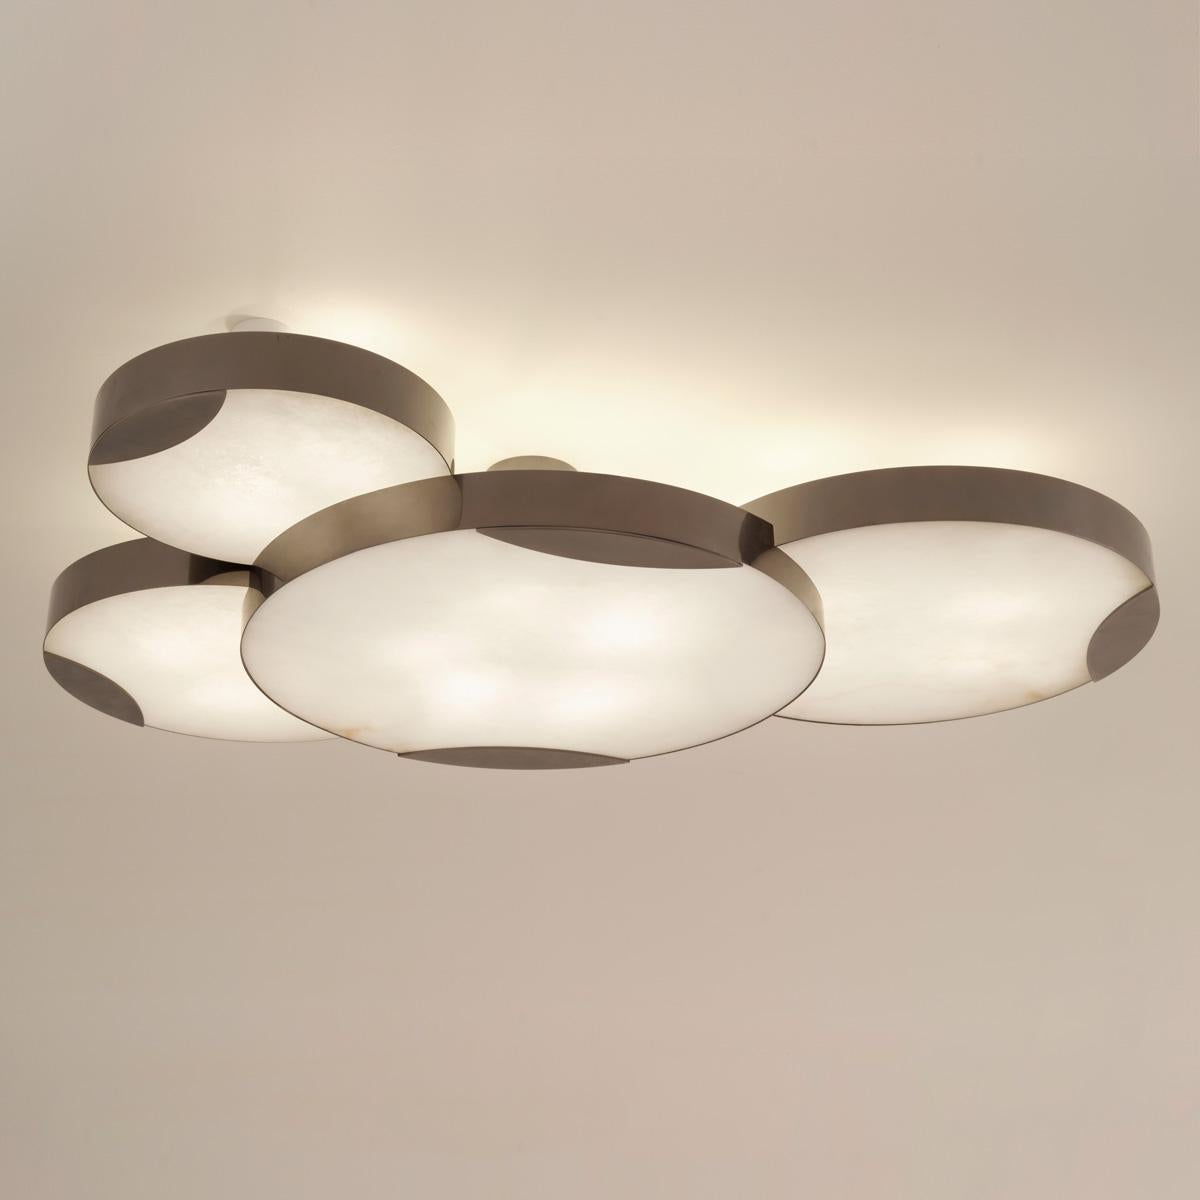 Cloud N.4 Ceiling Light by Gaspare Asaro-Satin Brass Finish For Sale 1